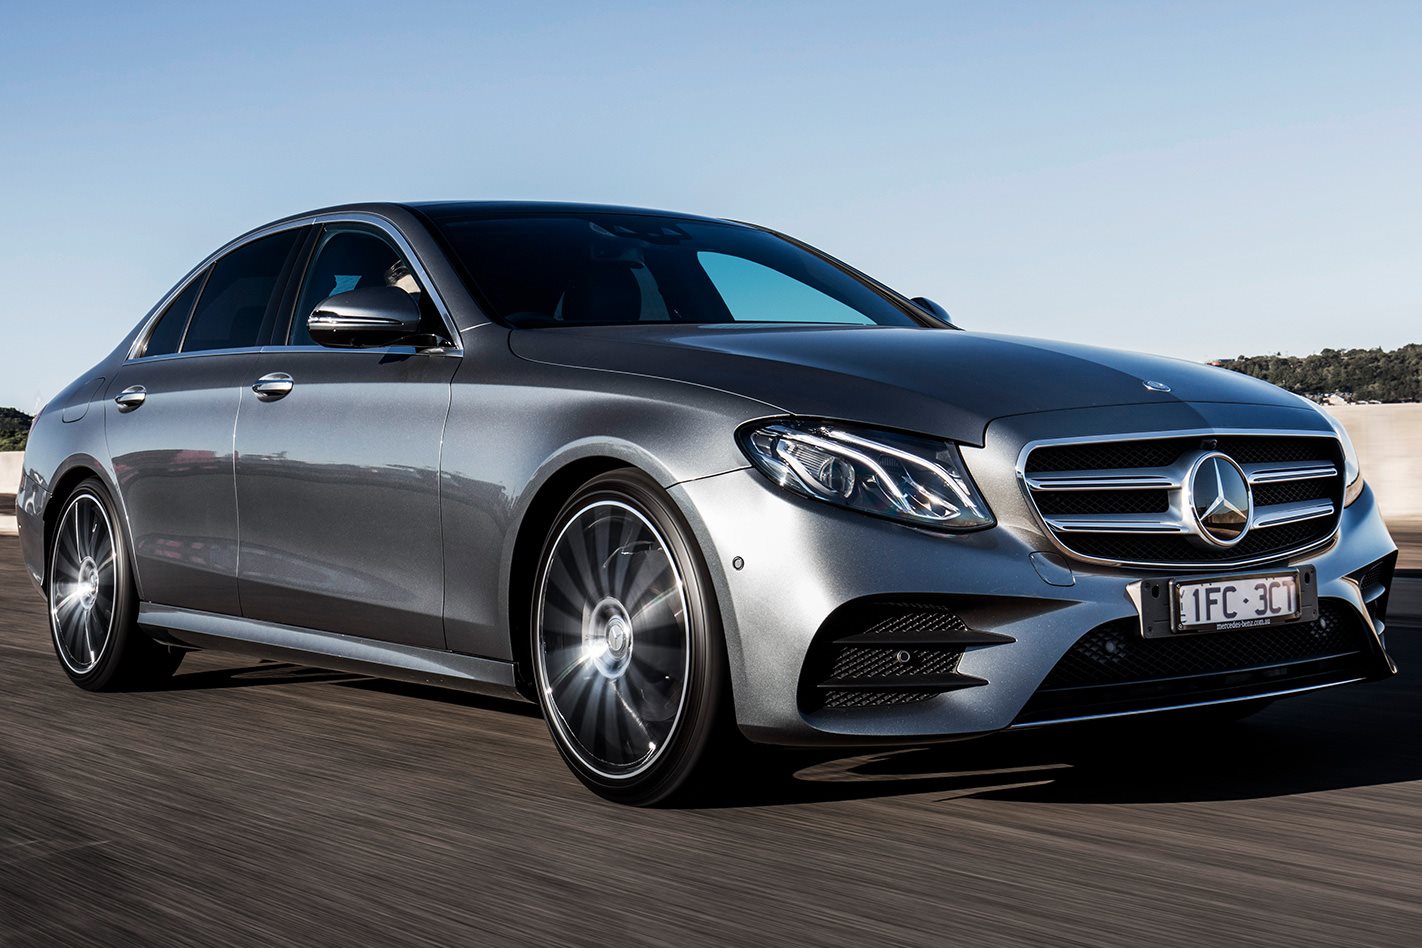 2018 Mercedes-Benz E-Class updated with new performance model